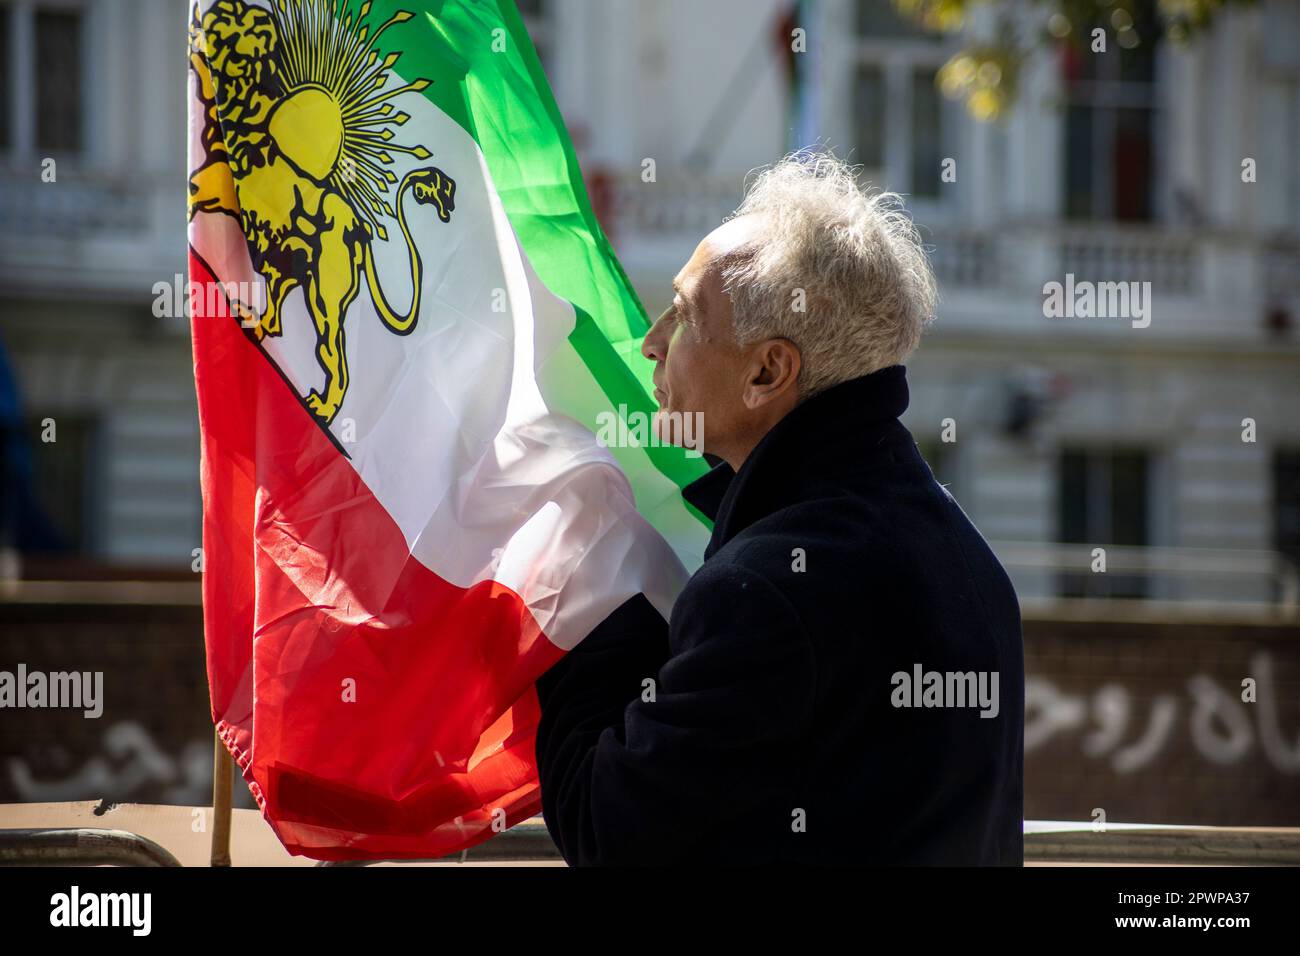 A patriot pays tribute to the 'Shir-o-Khorshid' (Lion and Sun) flag of Iran during an anti-regime protest in front of the Islamic Republic of Iran's e Stock Photo